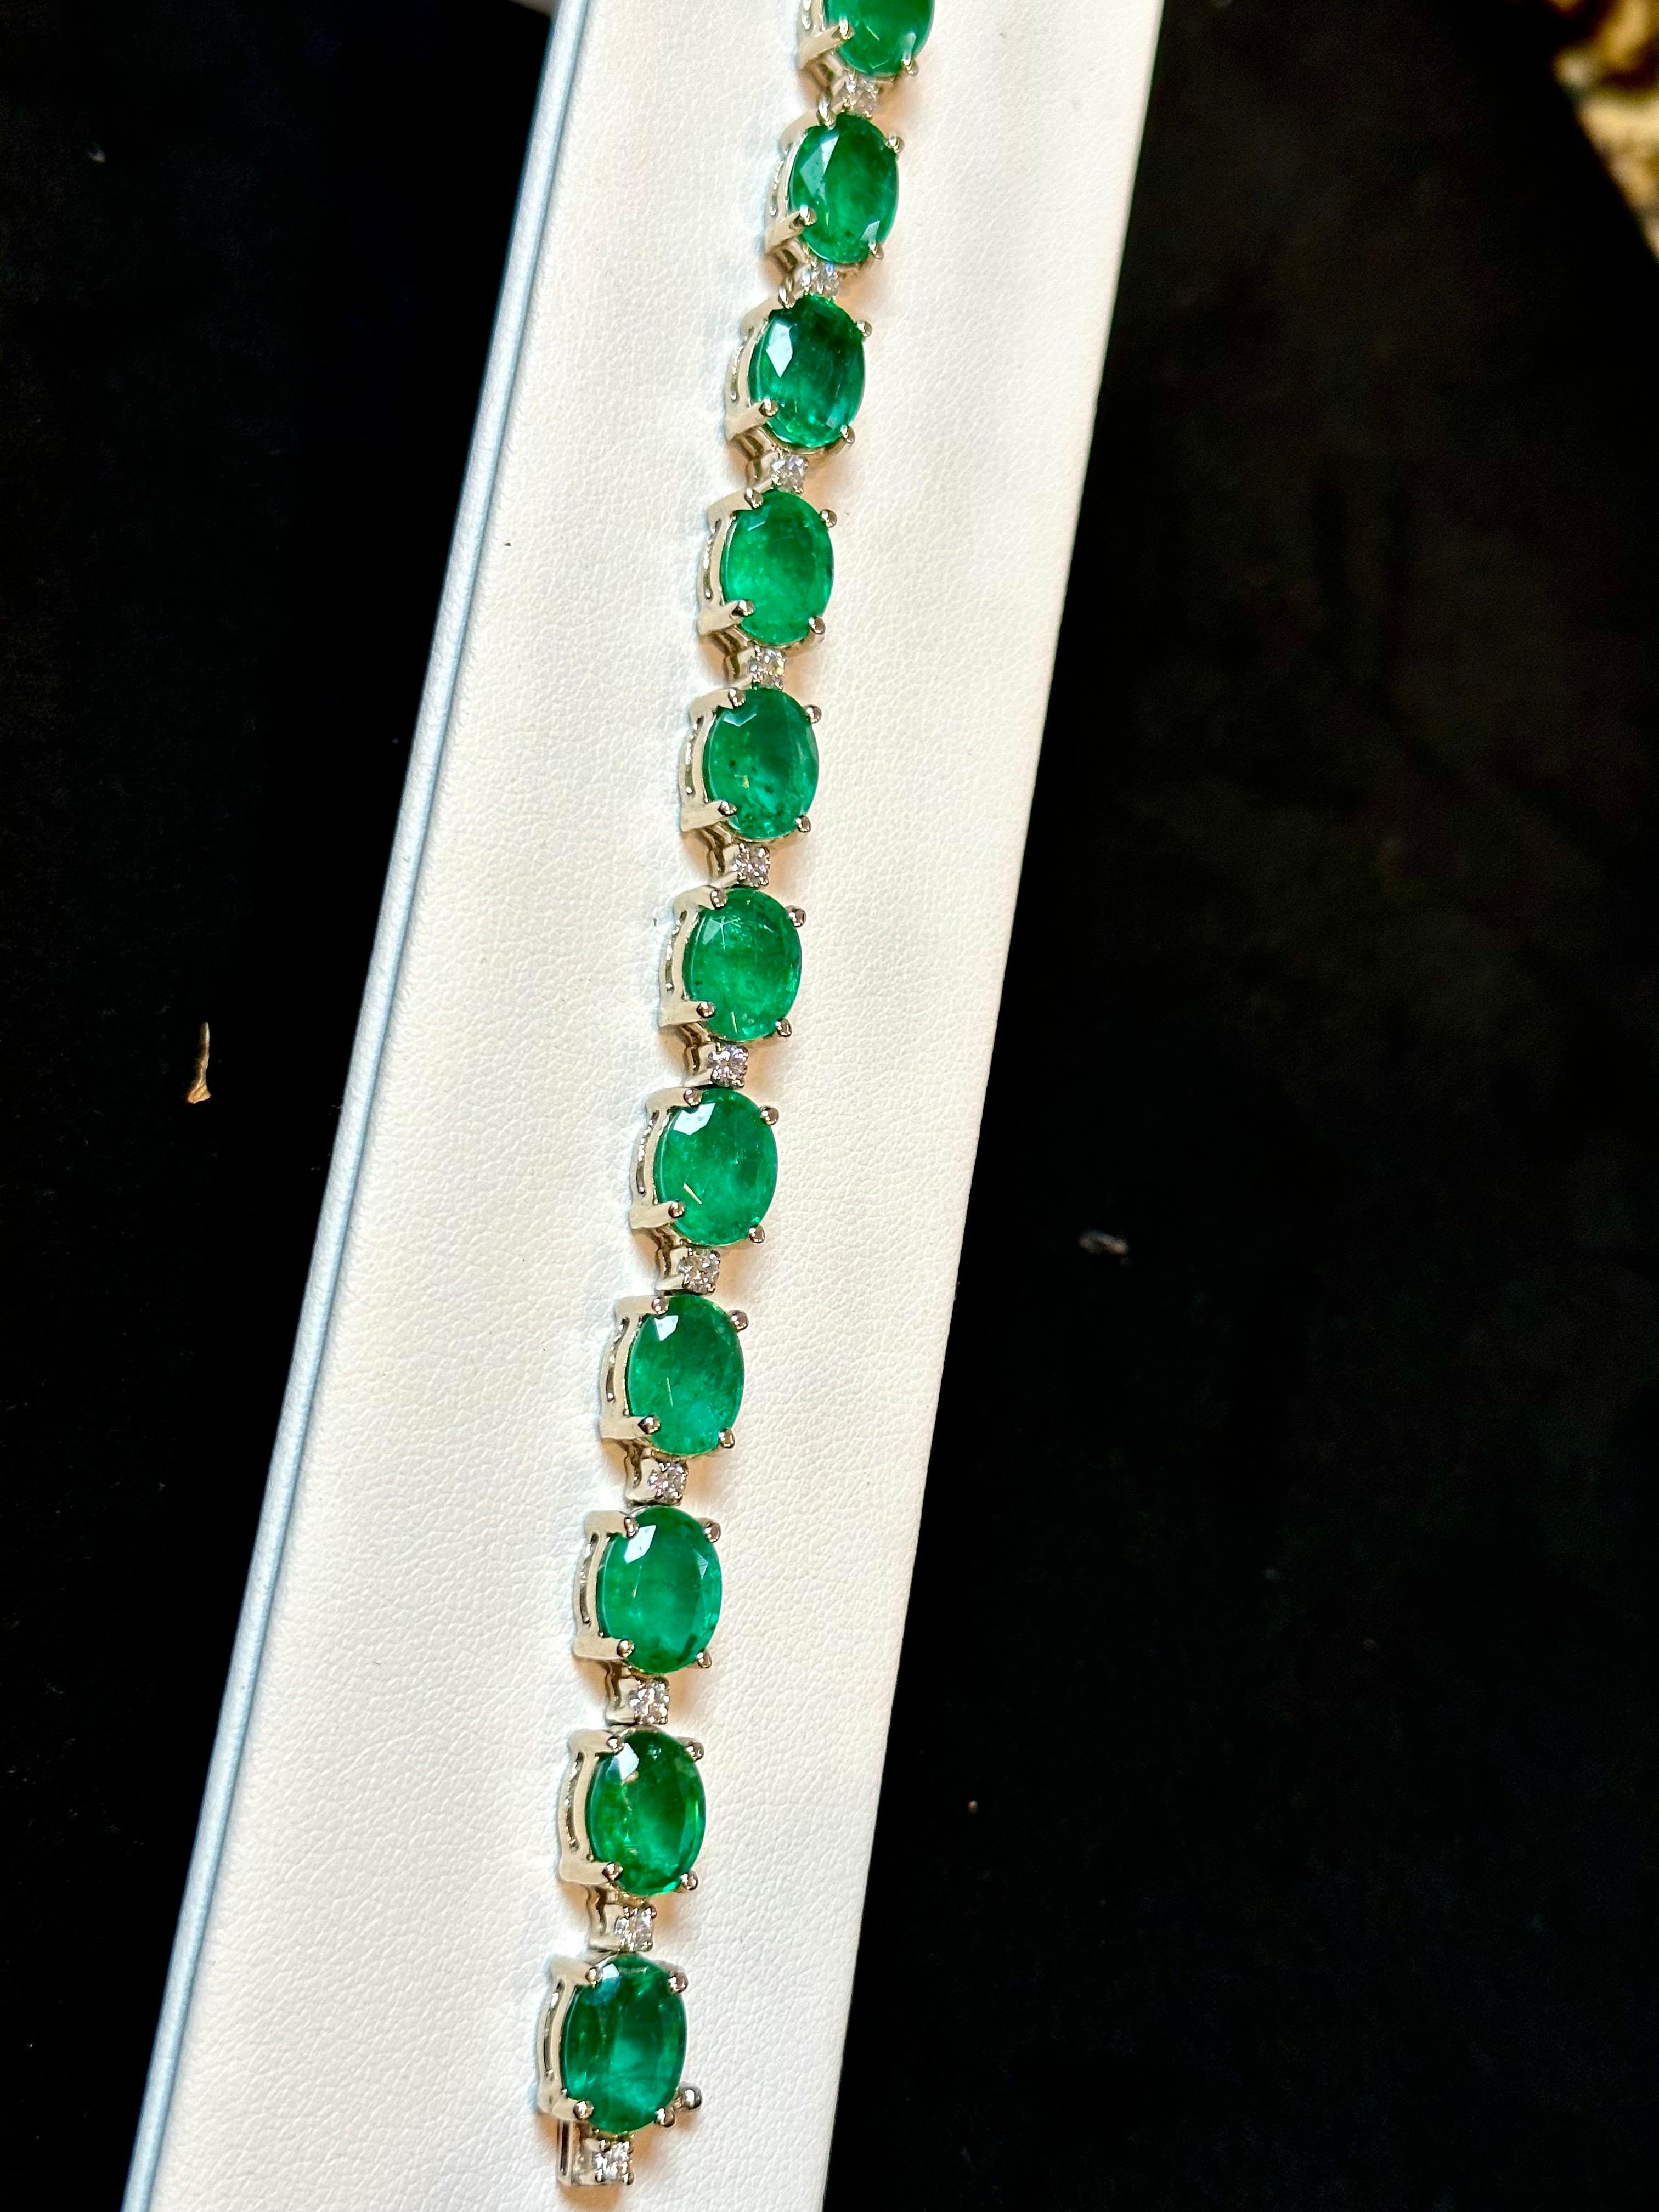 30 Carat Natural Zambian Emerald & Diamond Tennis Bracelet 14 Karat Gold In Excellent Condition For Sale In New York, NY